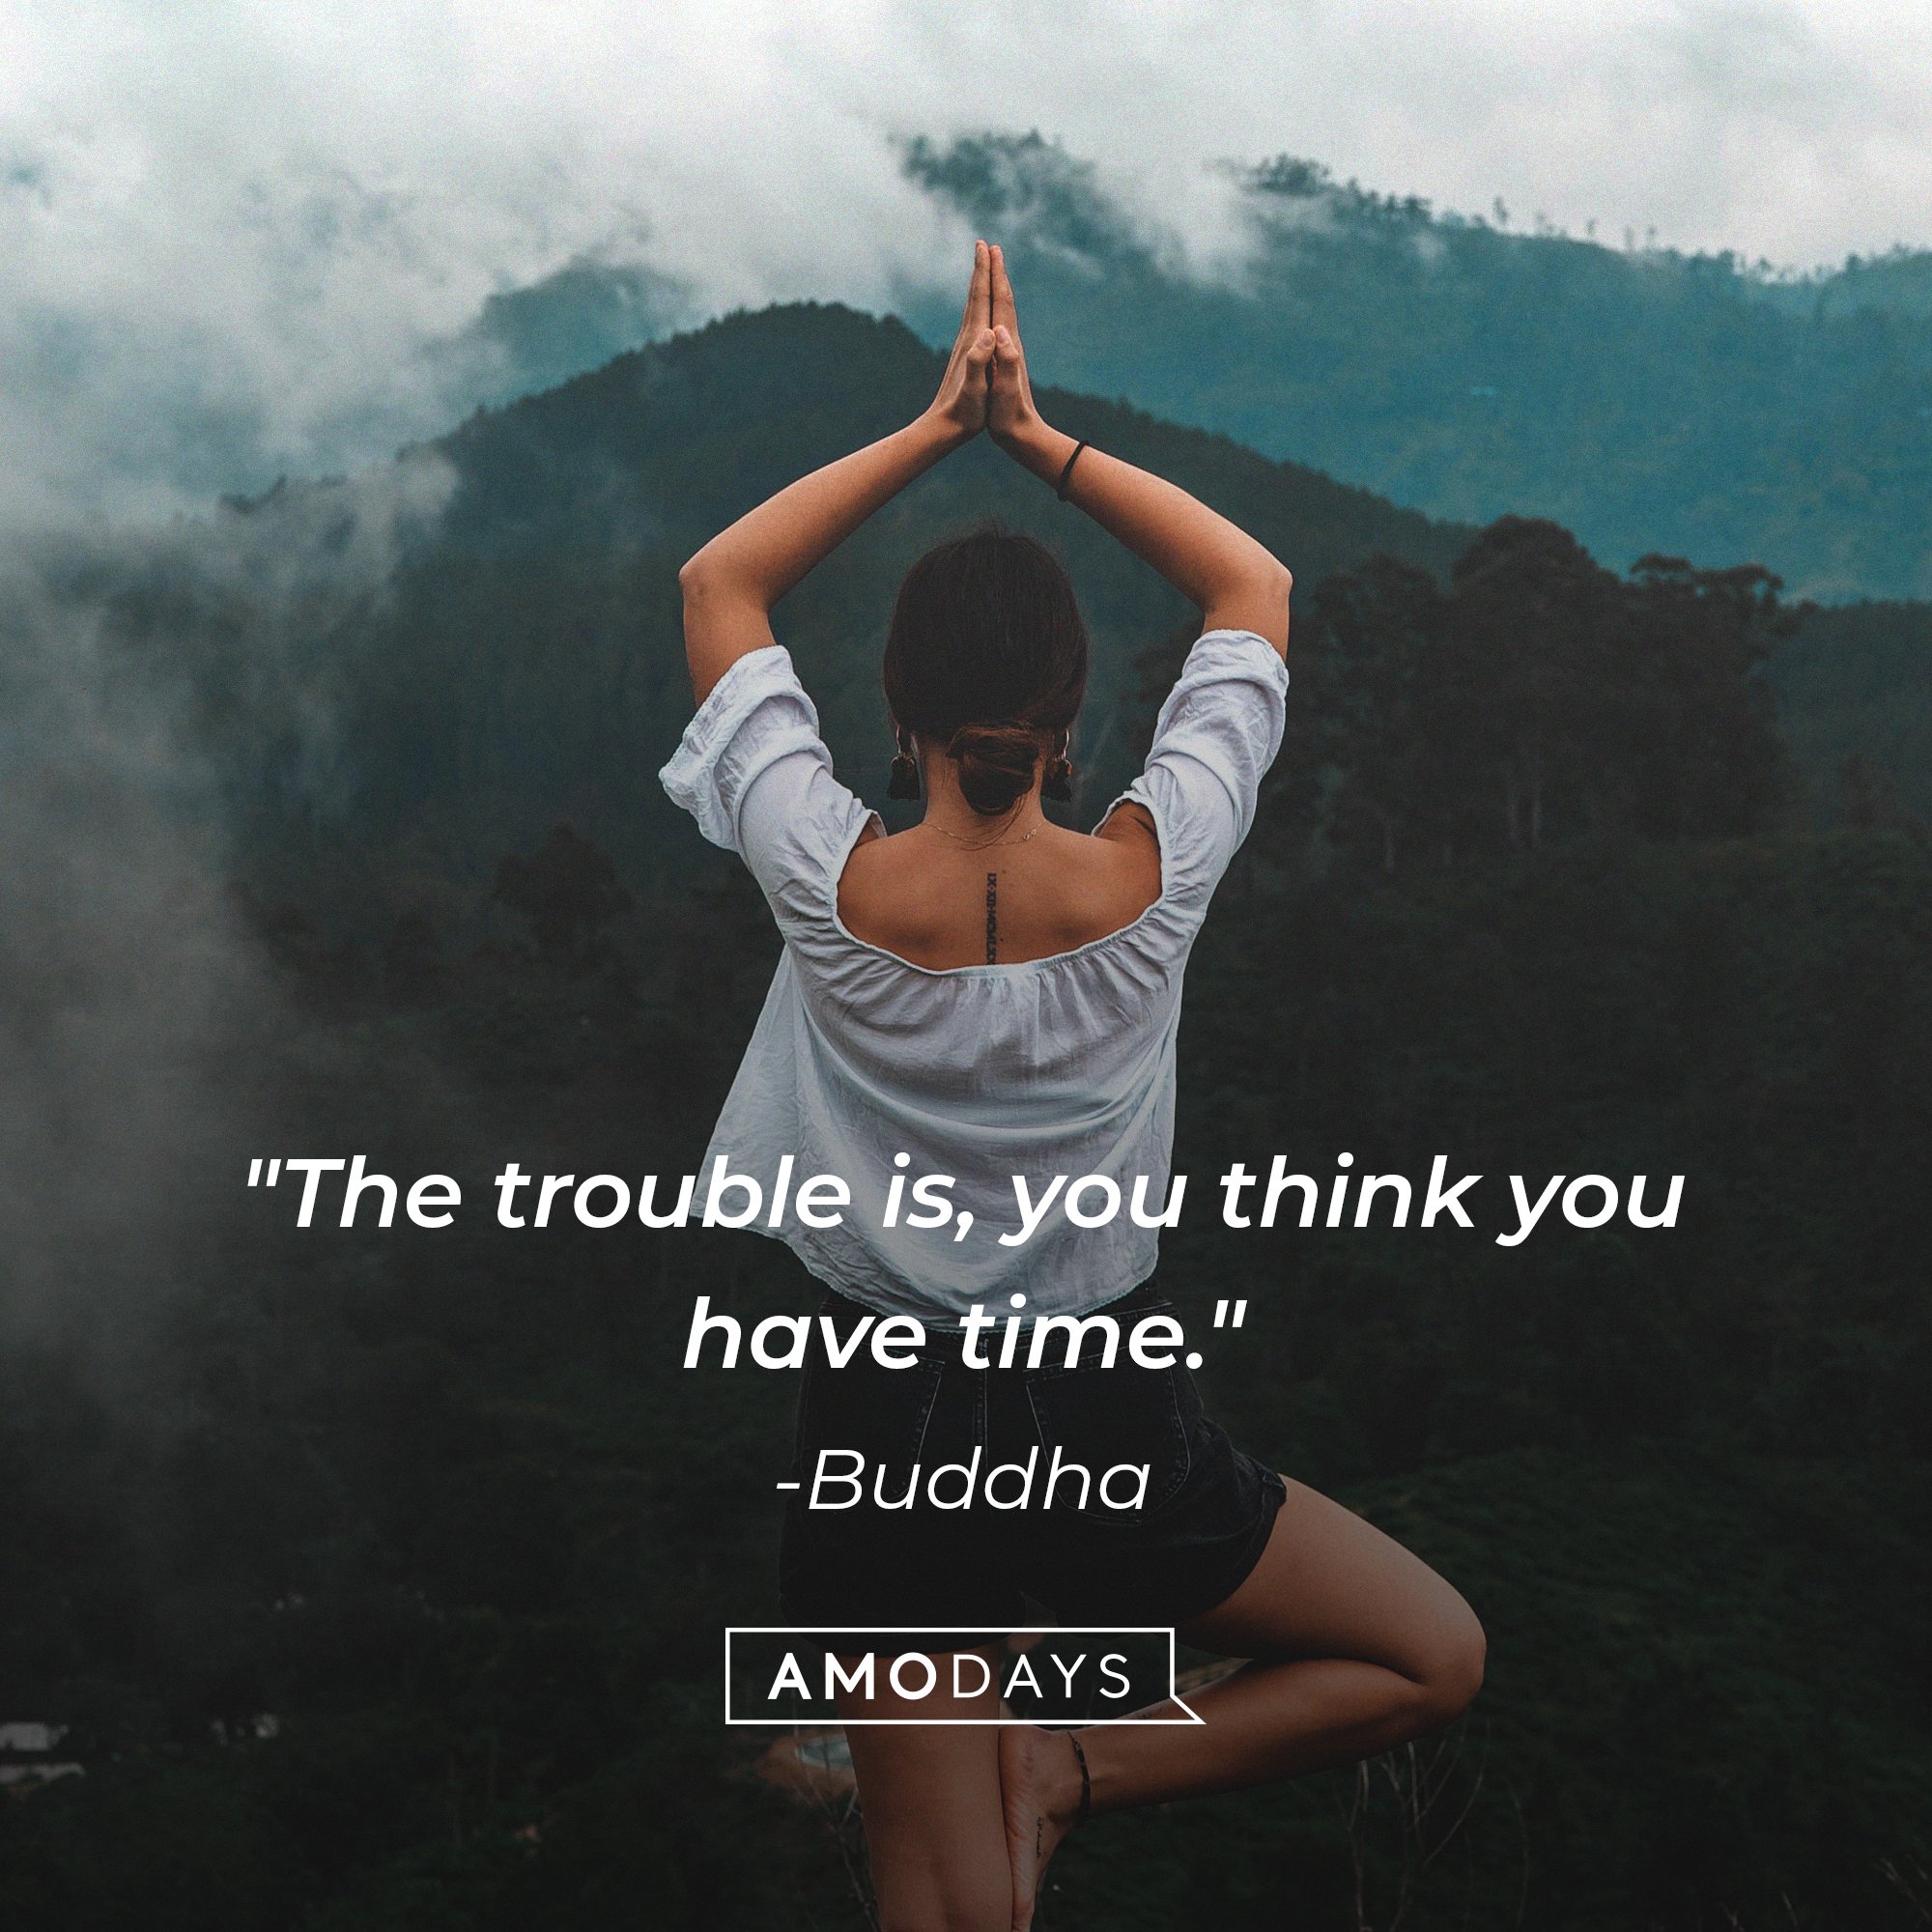 Buddha’s quote: "The trouble is, you think you have time." | Image: AmoDays